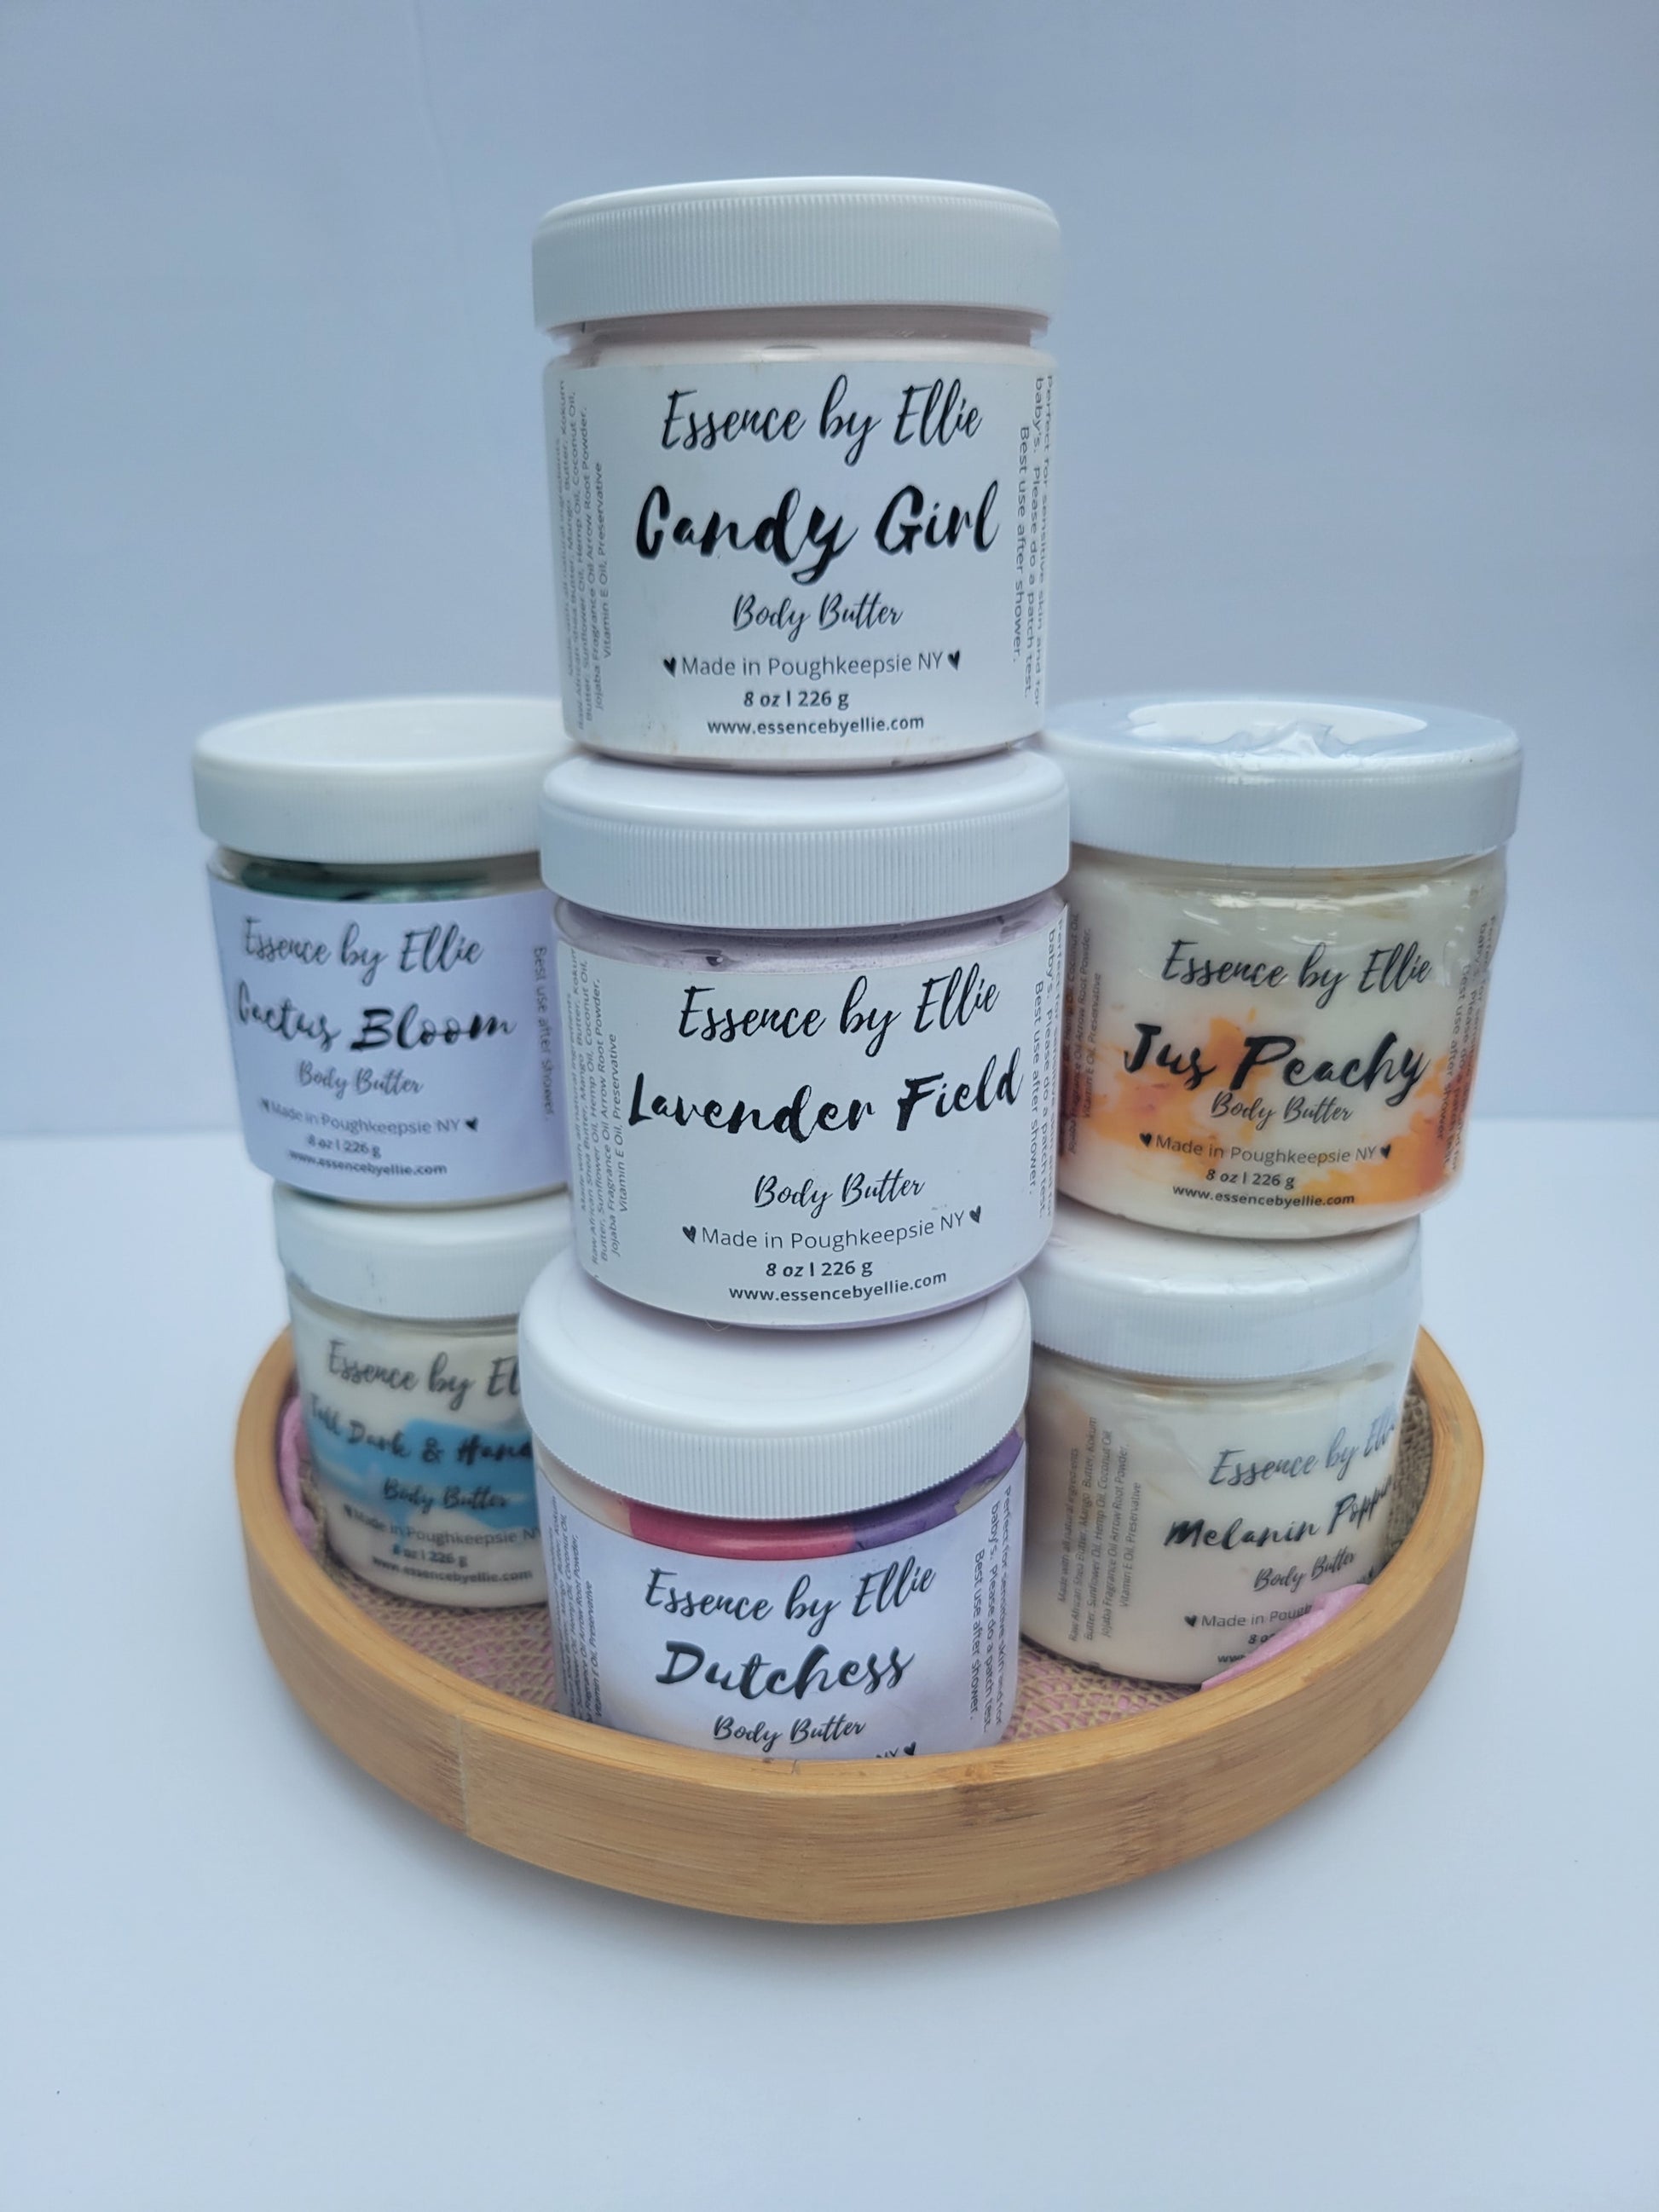 Variety of scented and unscented Buddy Butter in a jar